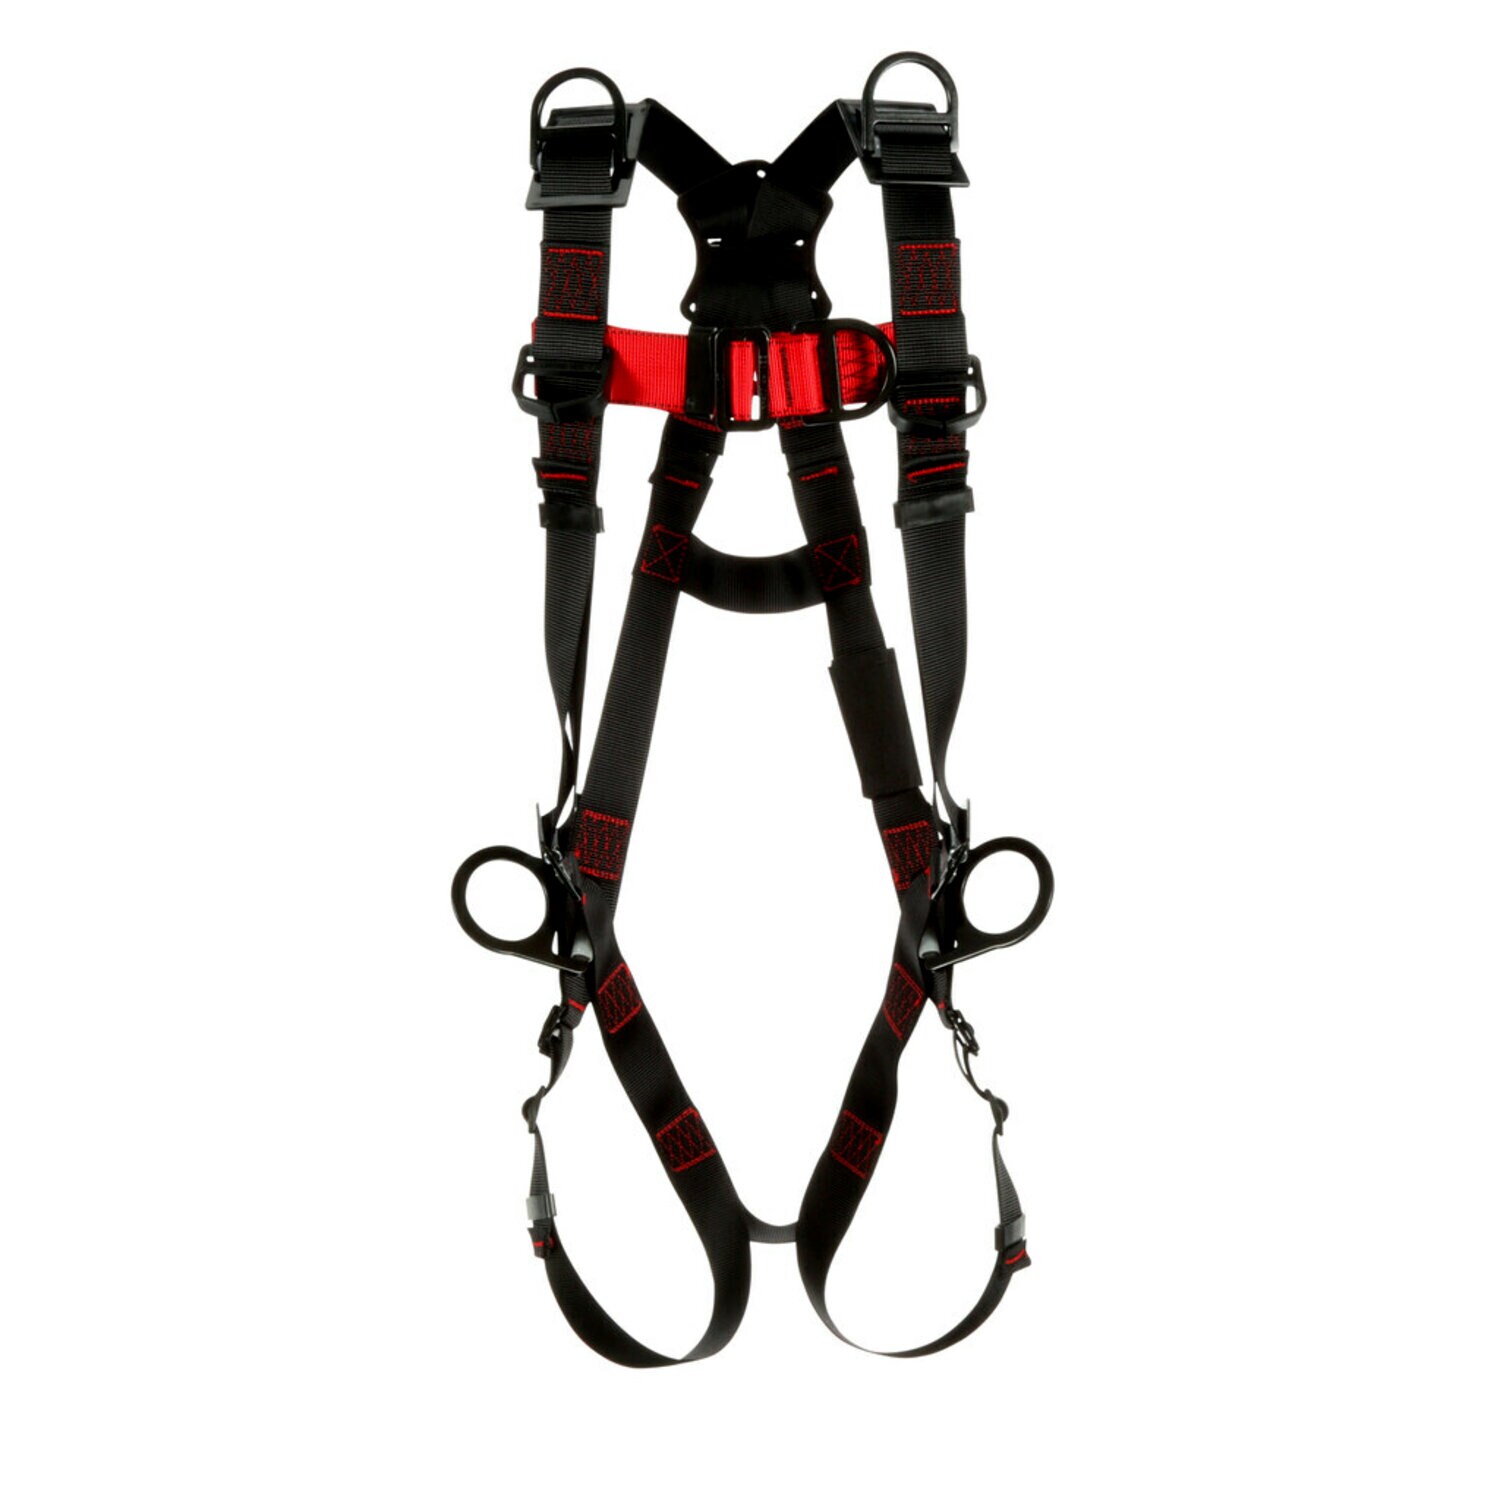 7012816760 - 3M Protecta P200 Vest Climbing/Positioning/Retrieval Safety Harness 1161515, X-Large